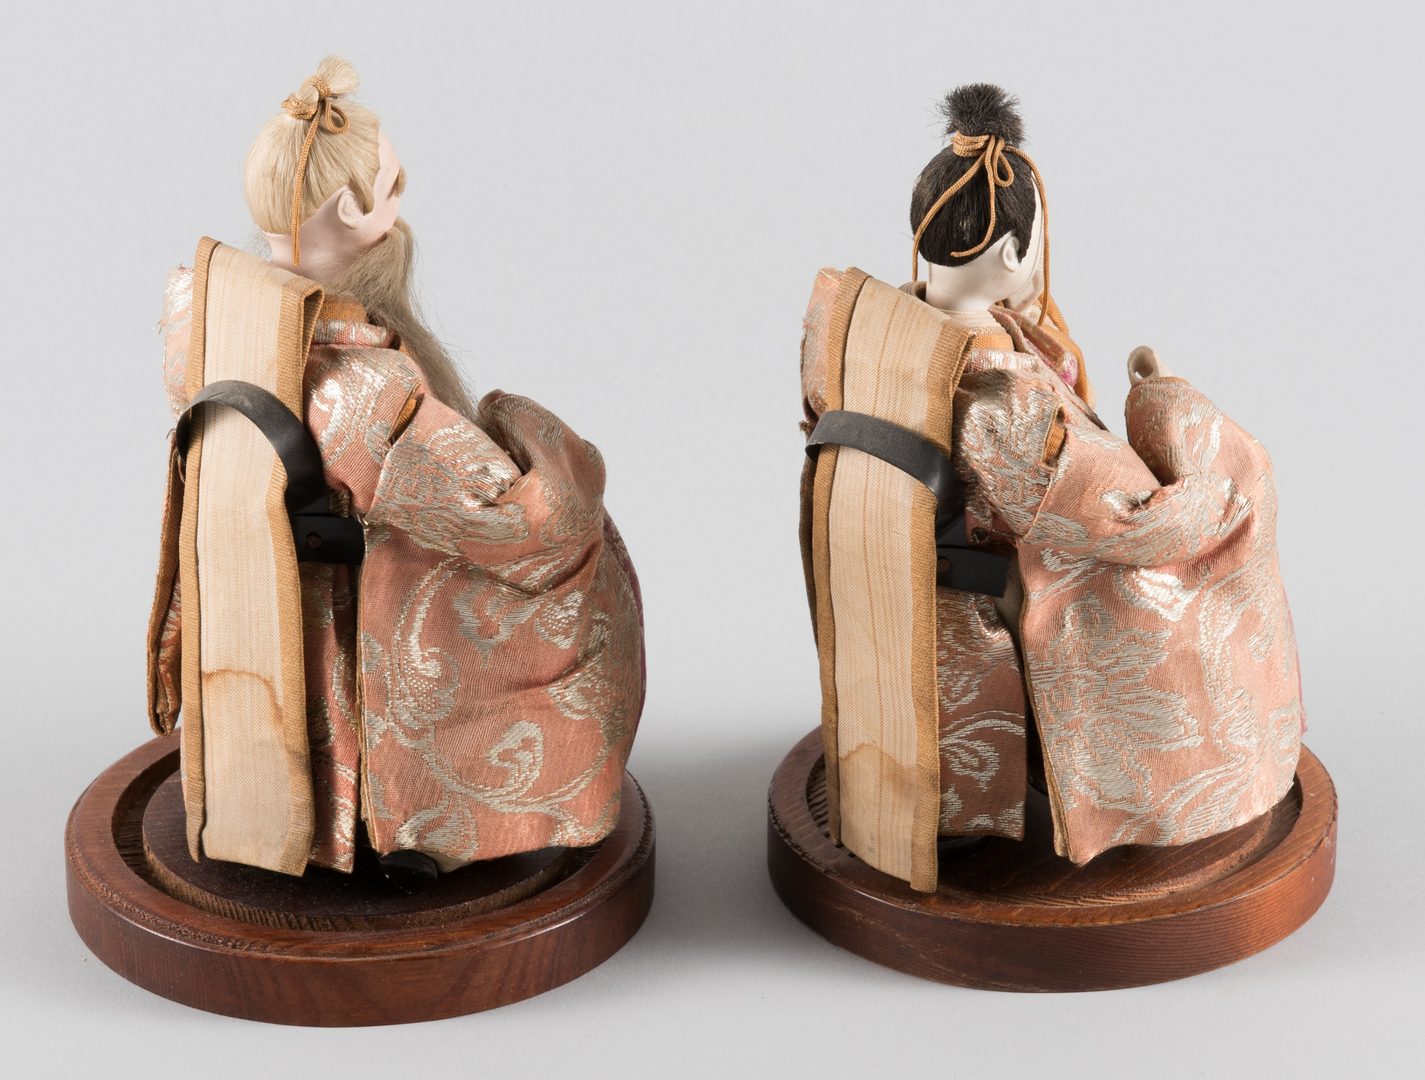 Lot 276: Japanese Kabuki and Emperor Dolls w/ accoutrements